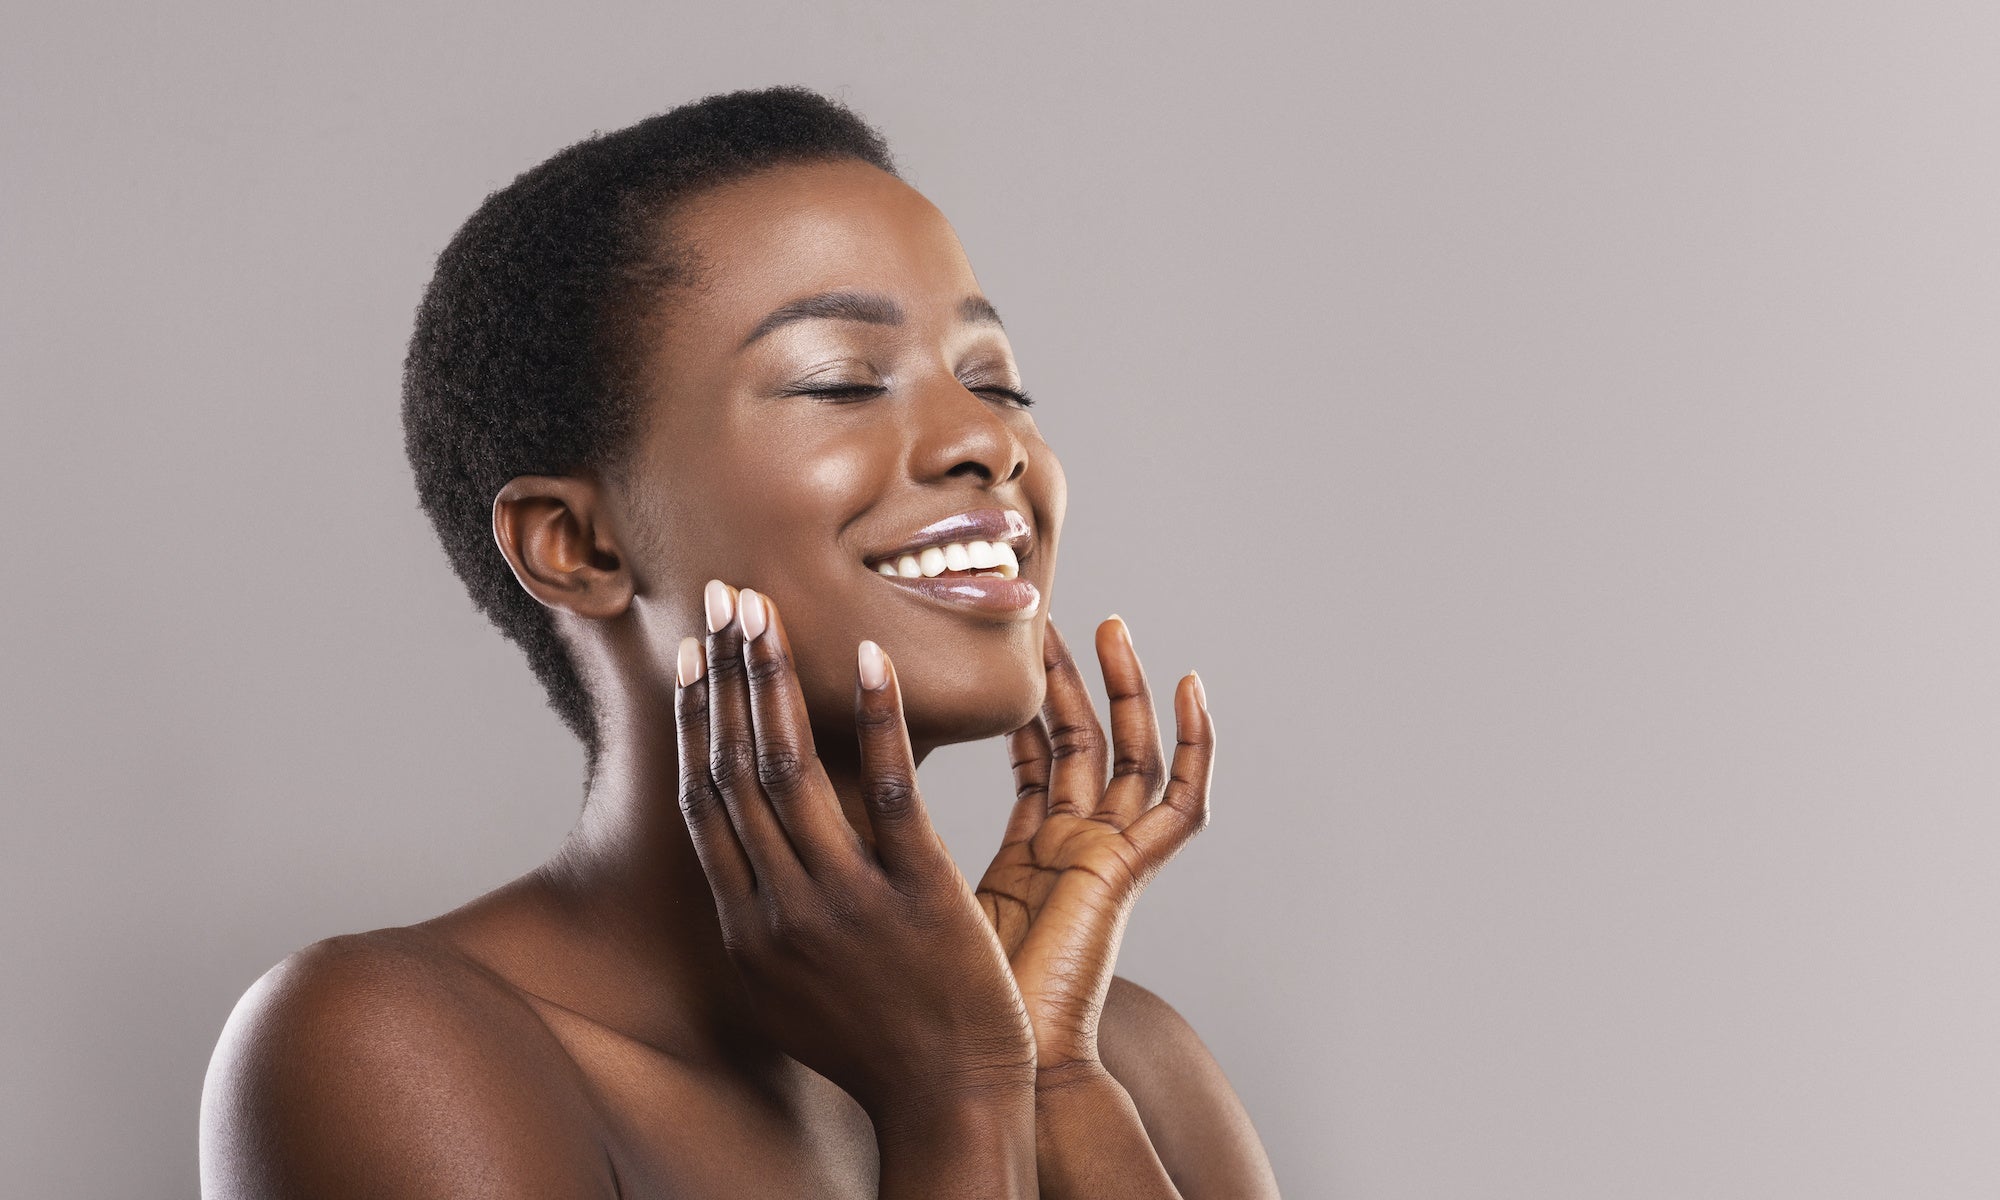 Do You Have Healthy Skin? How to Tell and Why It's Important